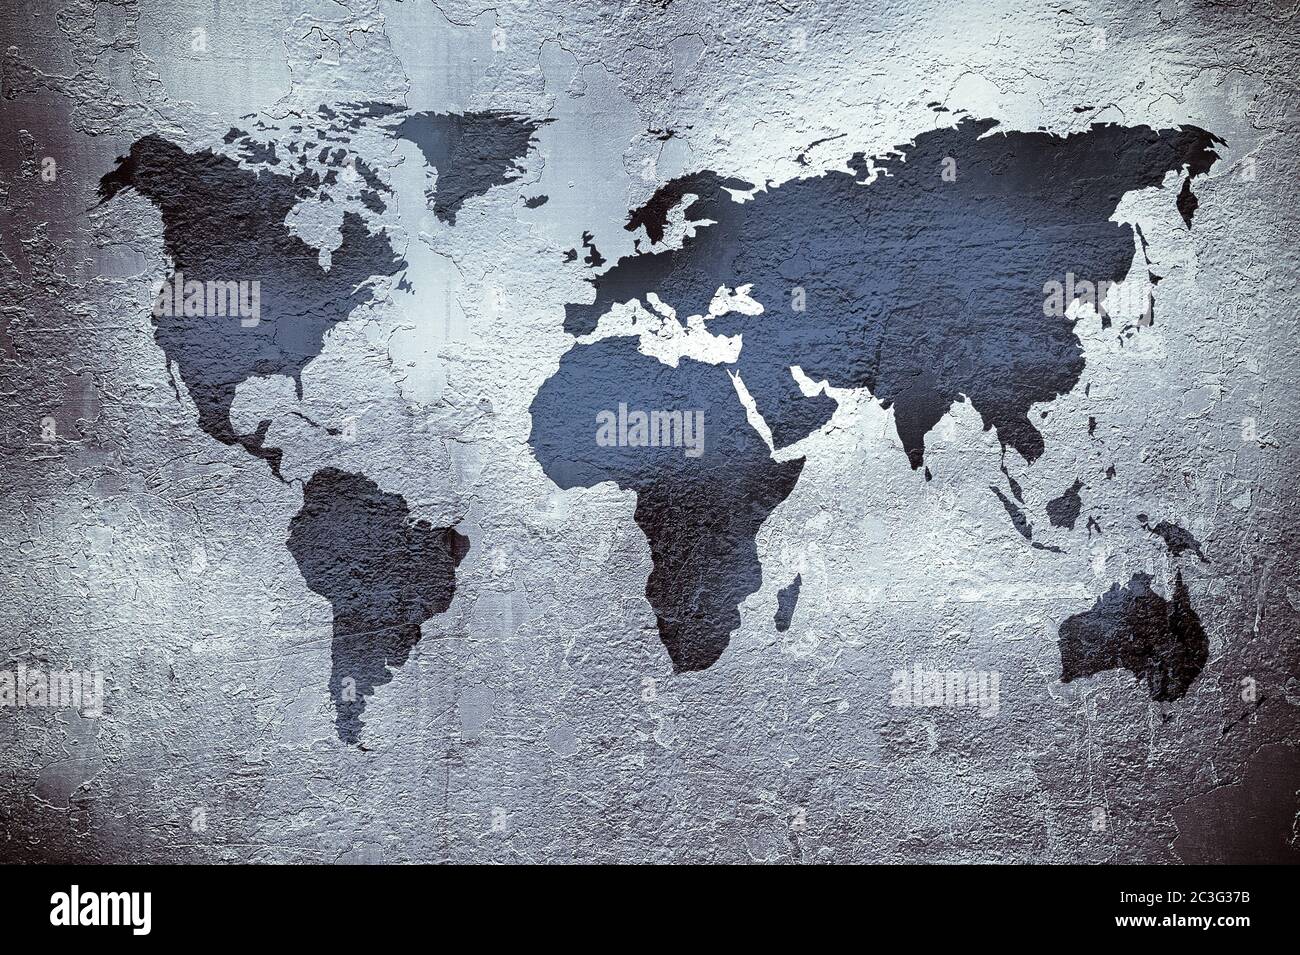 grunge map of the world over metal texture Stock Photo